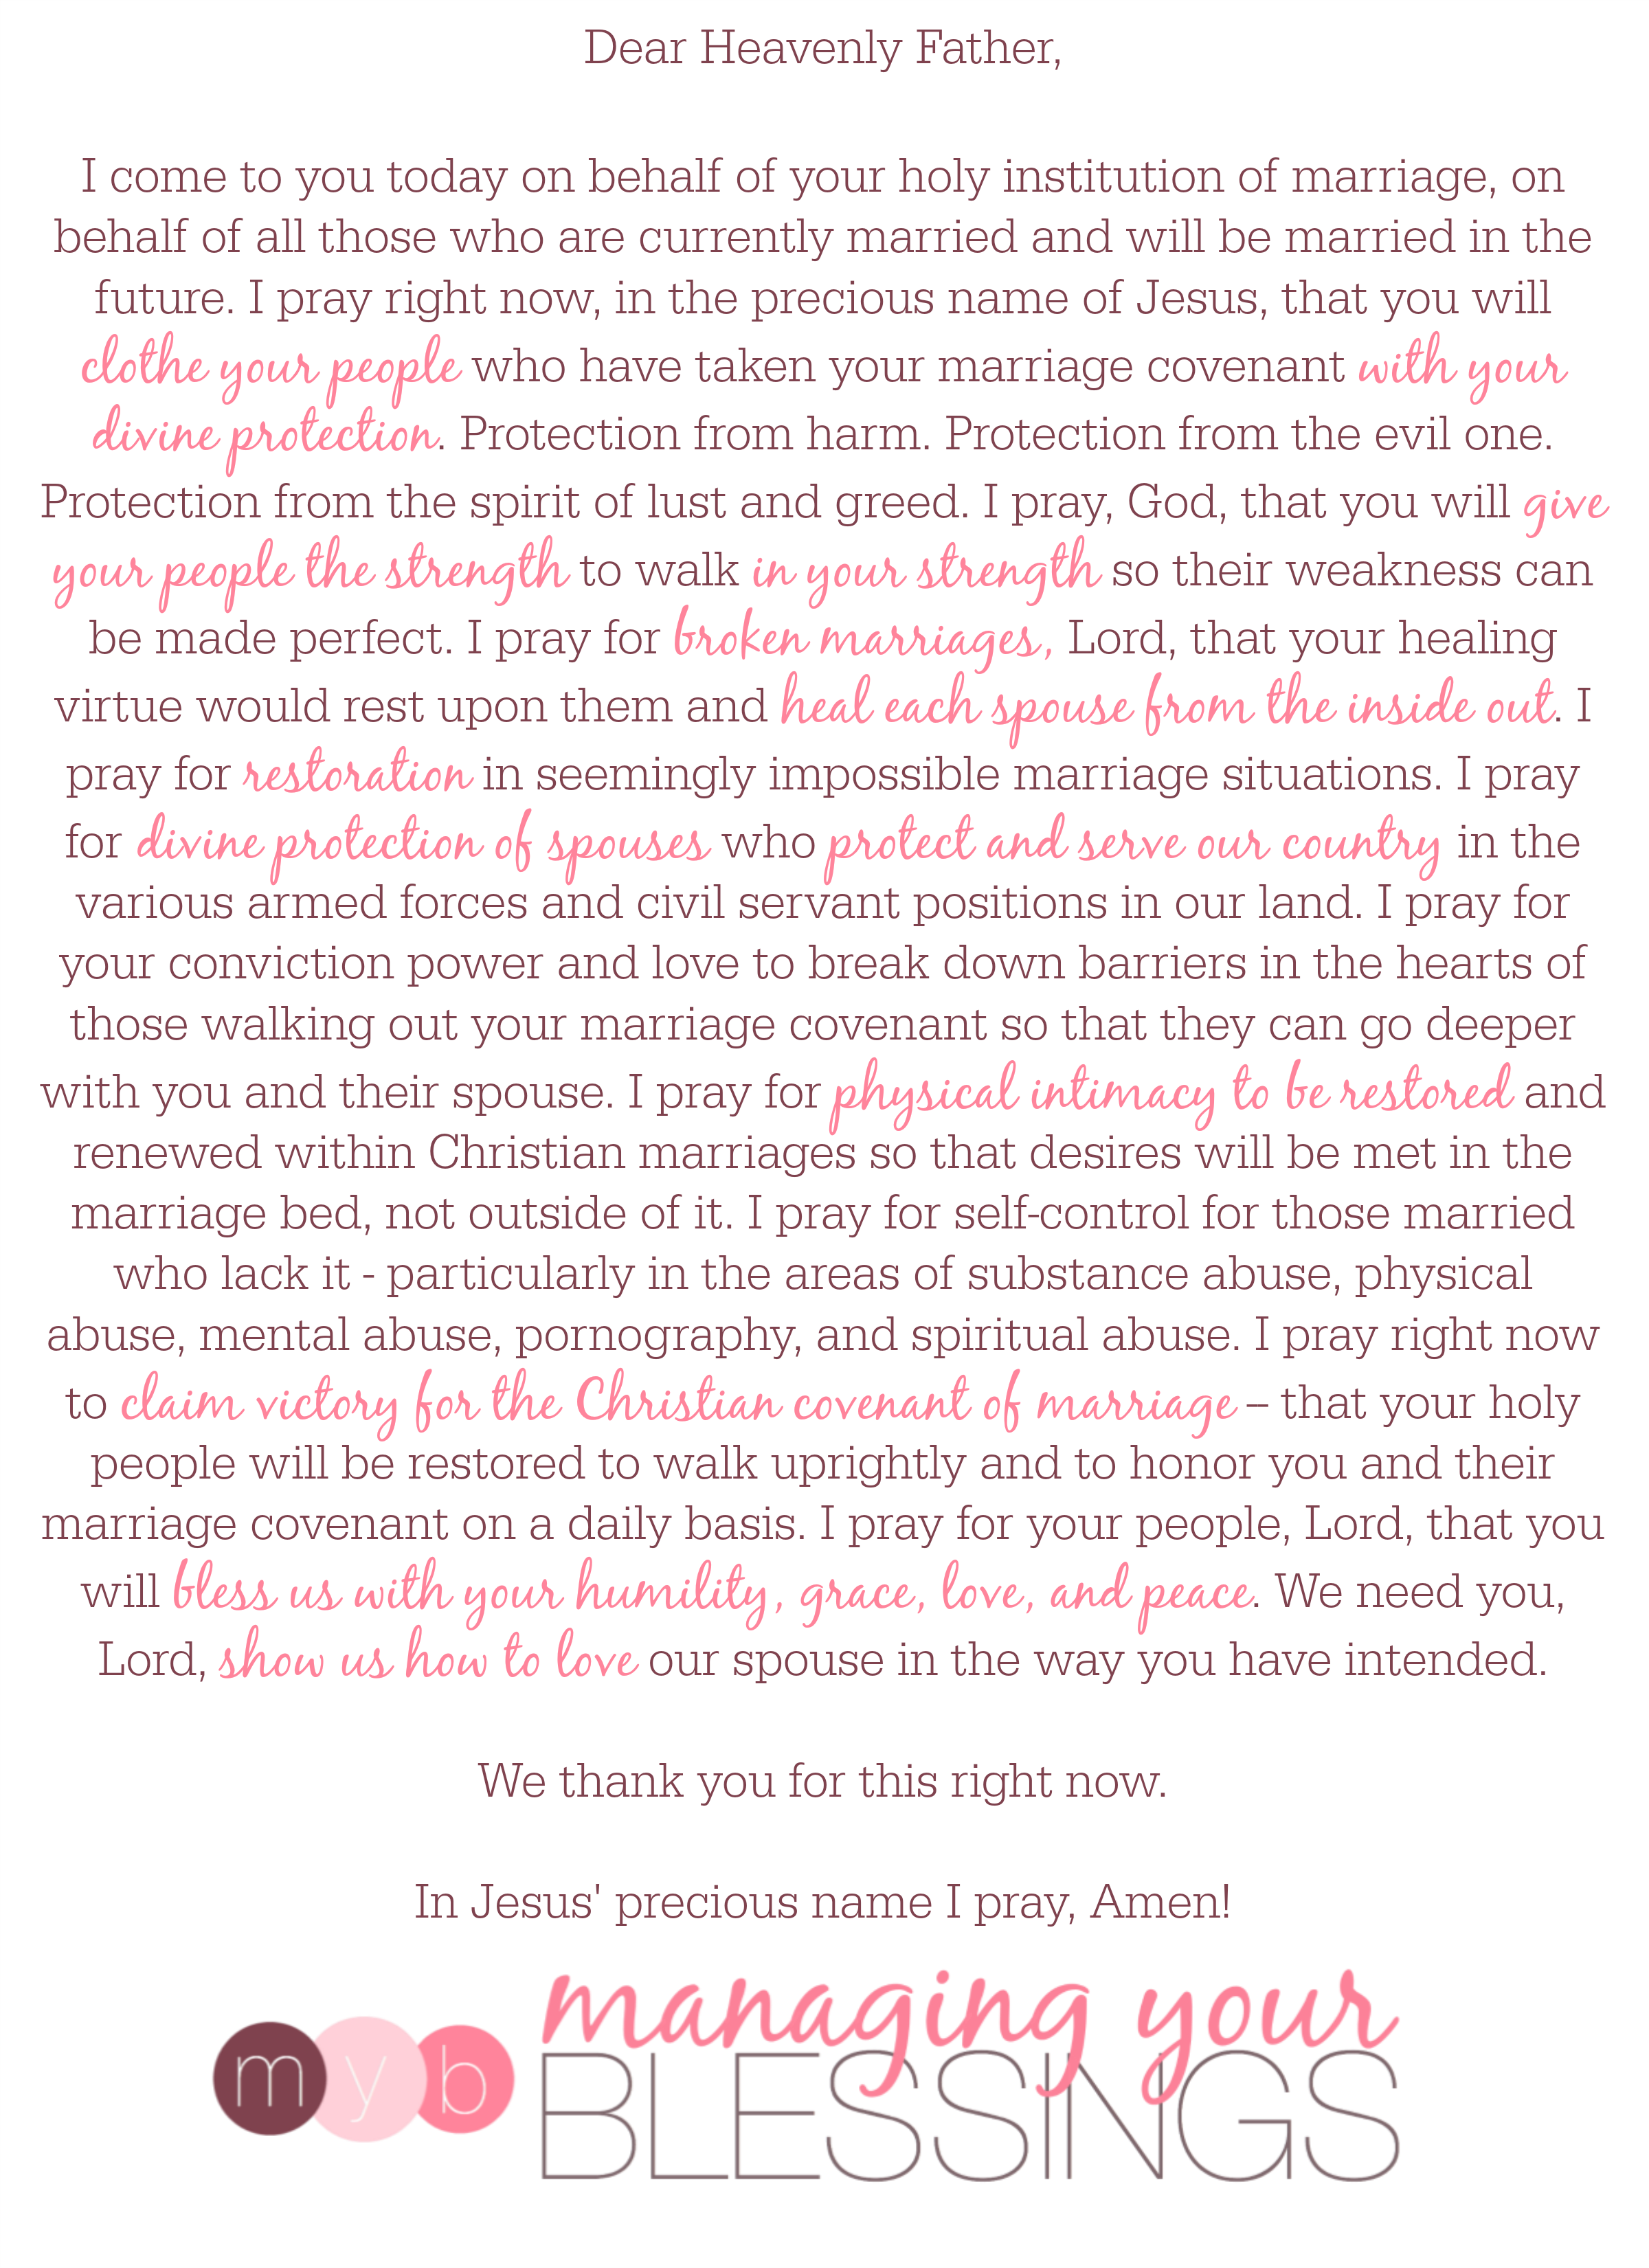 Come and download this beautiful prayer for marriage.